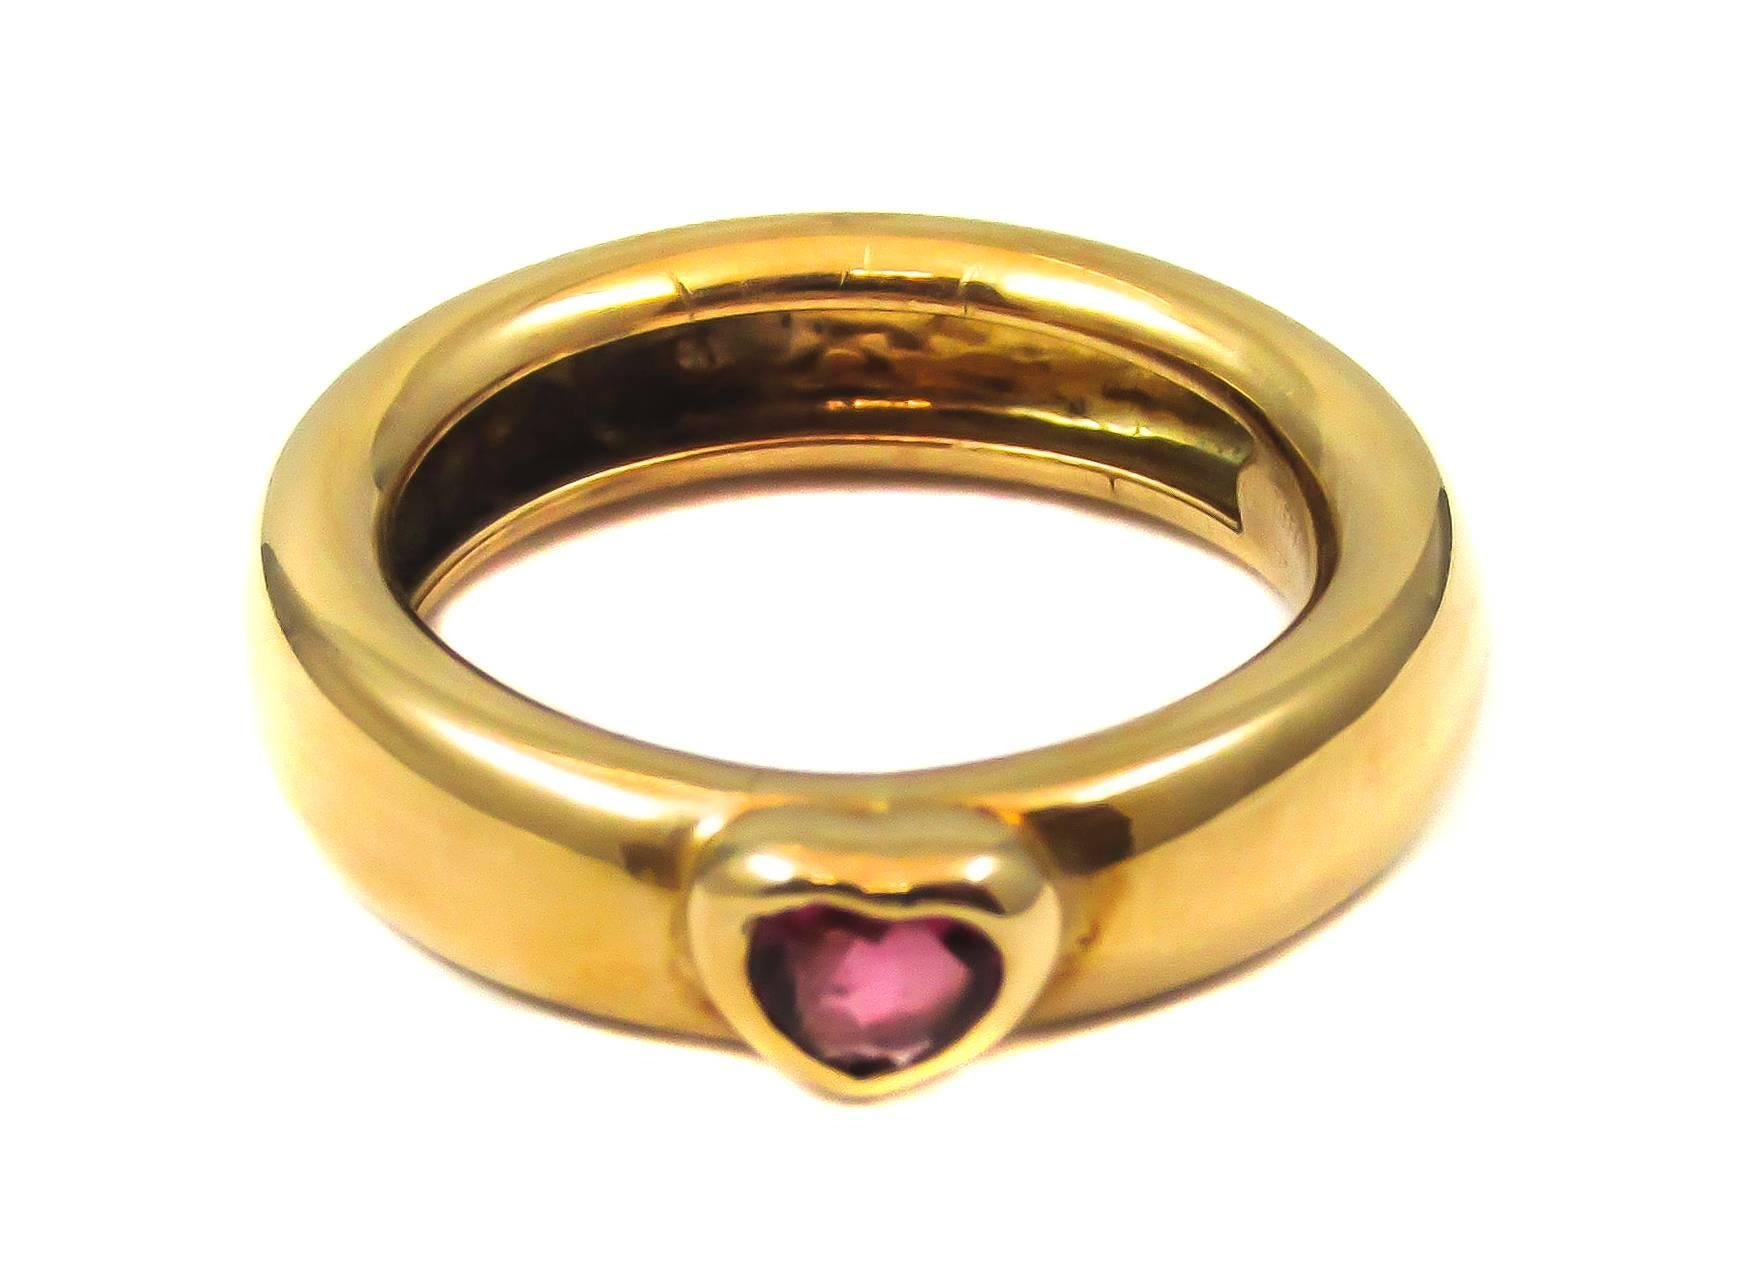 Tiffany & Co. yellow gold band ring features a heart shaped Ruby in a gold heart shaped bezel setting. What could be more romantic as a ruby red token of your heart’s love? Tiffany has always understood the symbolic attraction that jewelry can